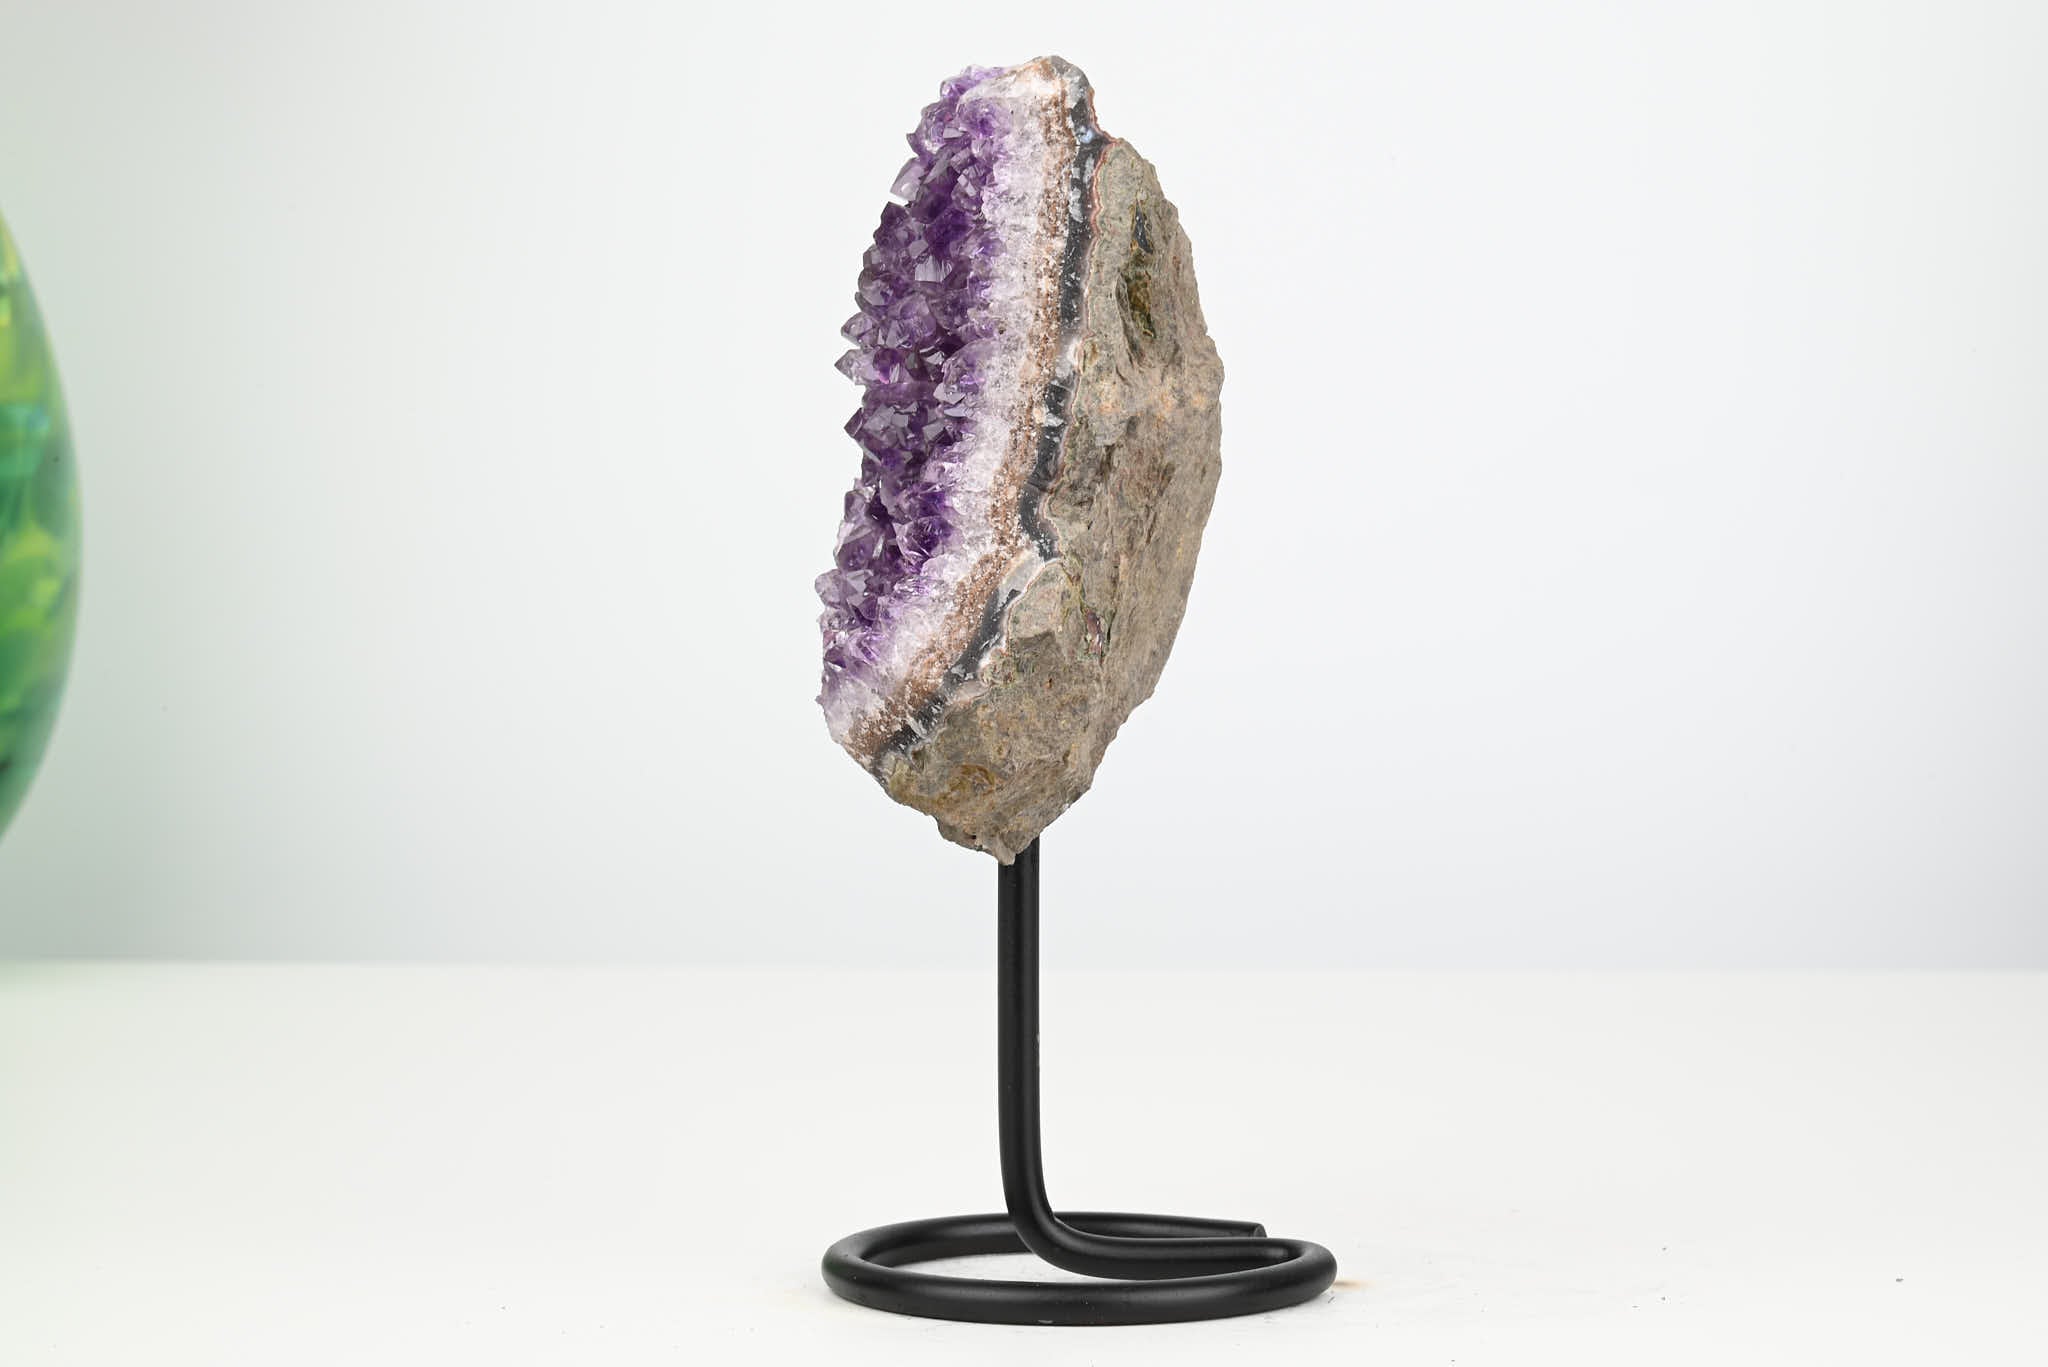 Amethyst Cluster on Stand - Small 16cm Tall - #CLUSAM-63043